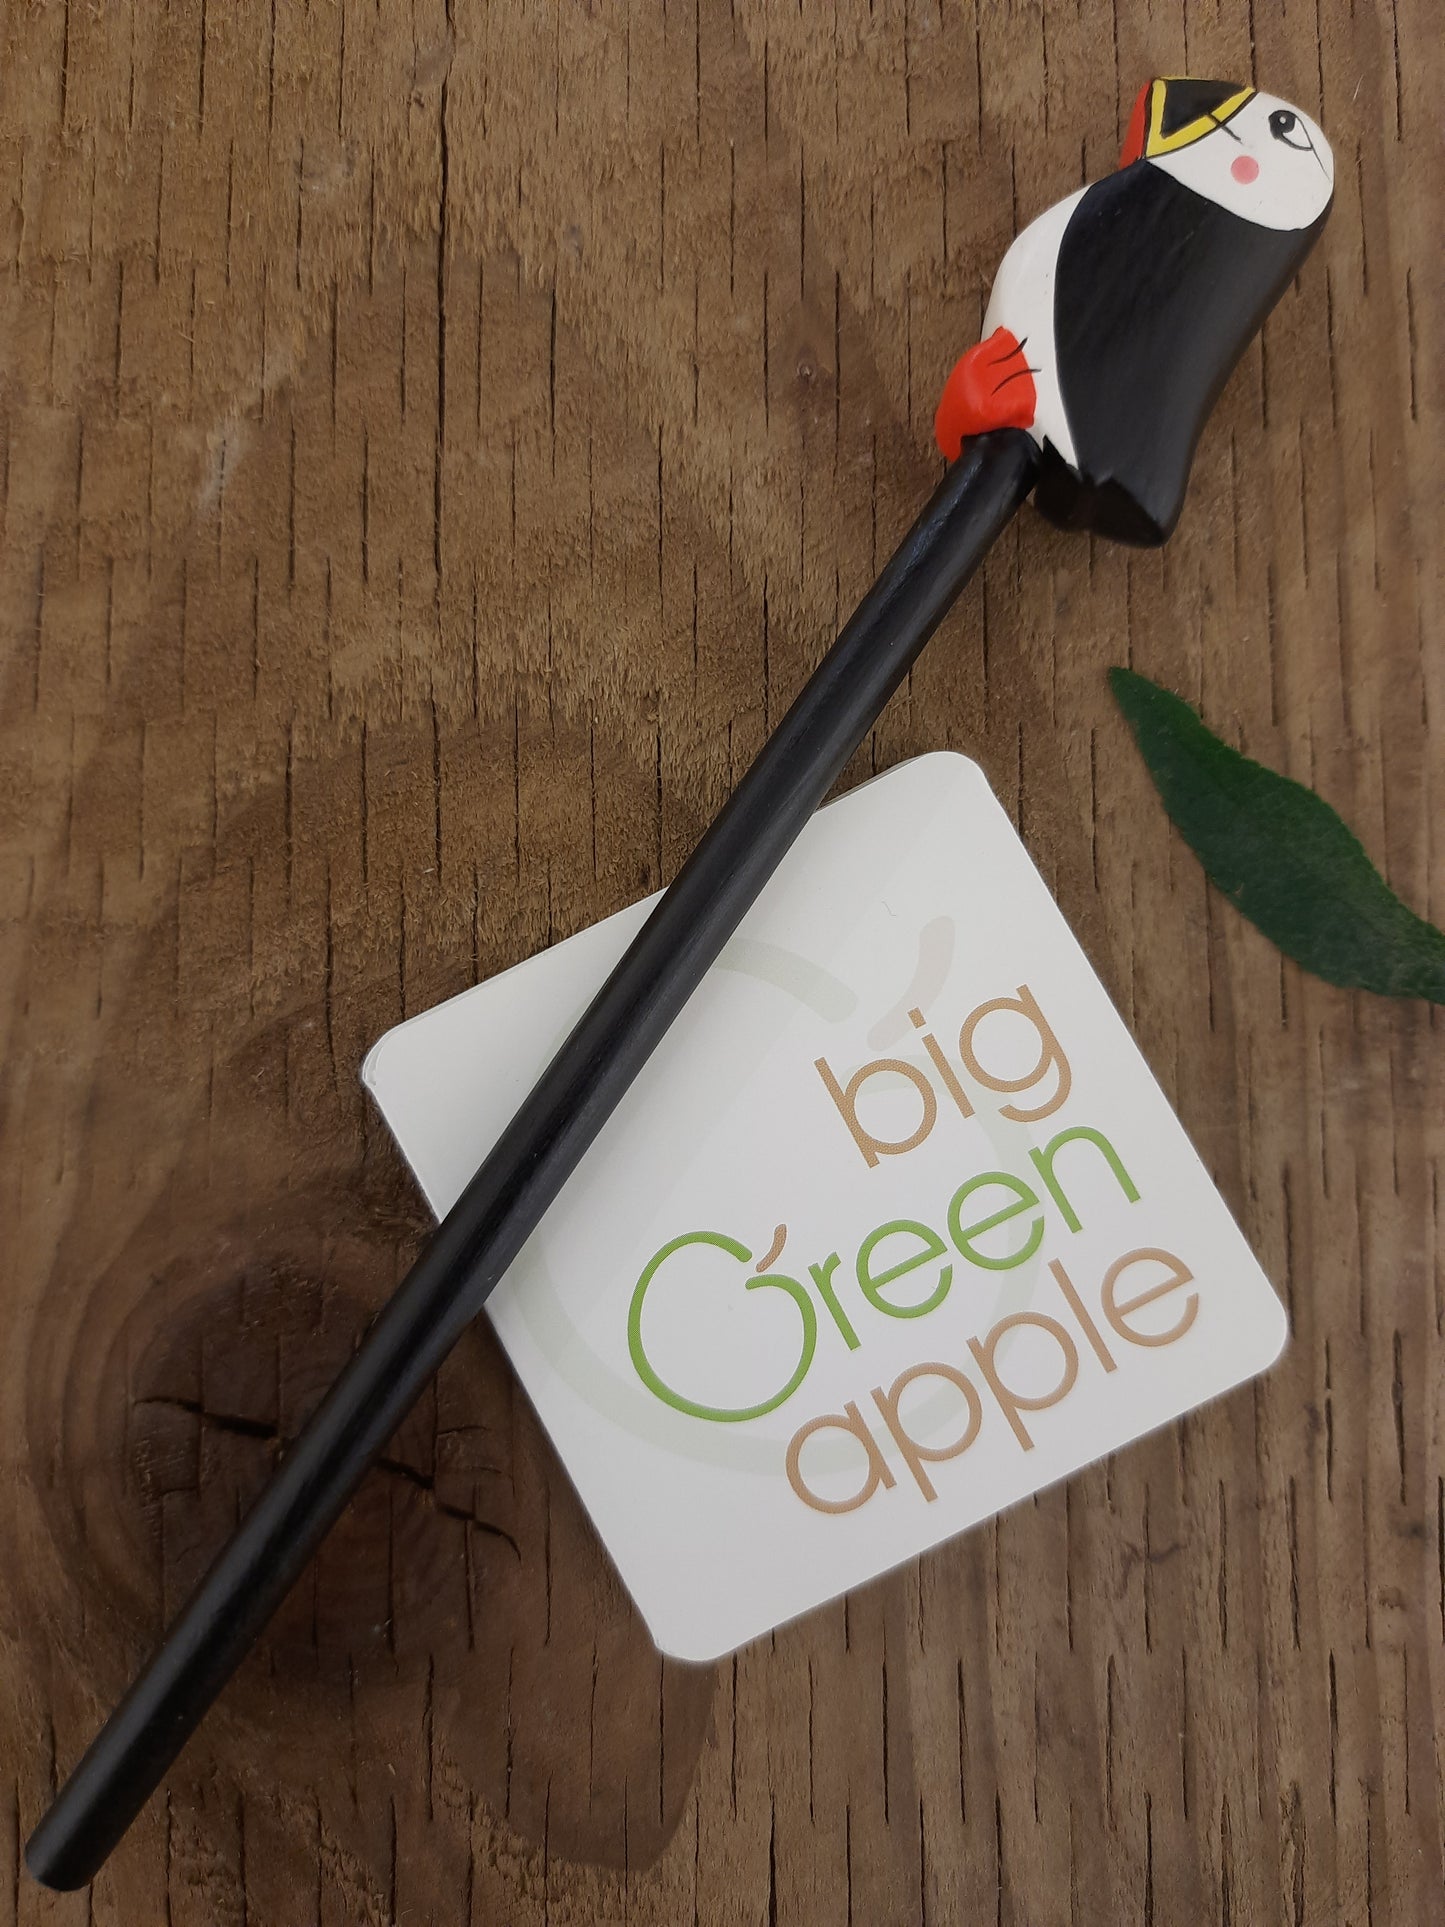 Ethical gifts for her, fair trade uk products uk, bird pencil, big green apple